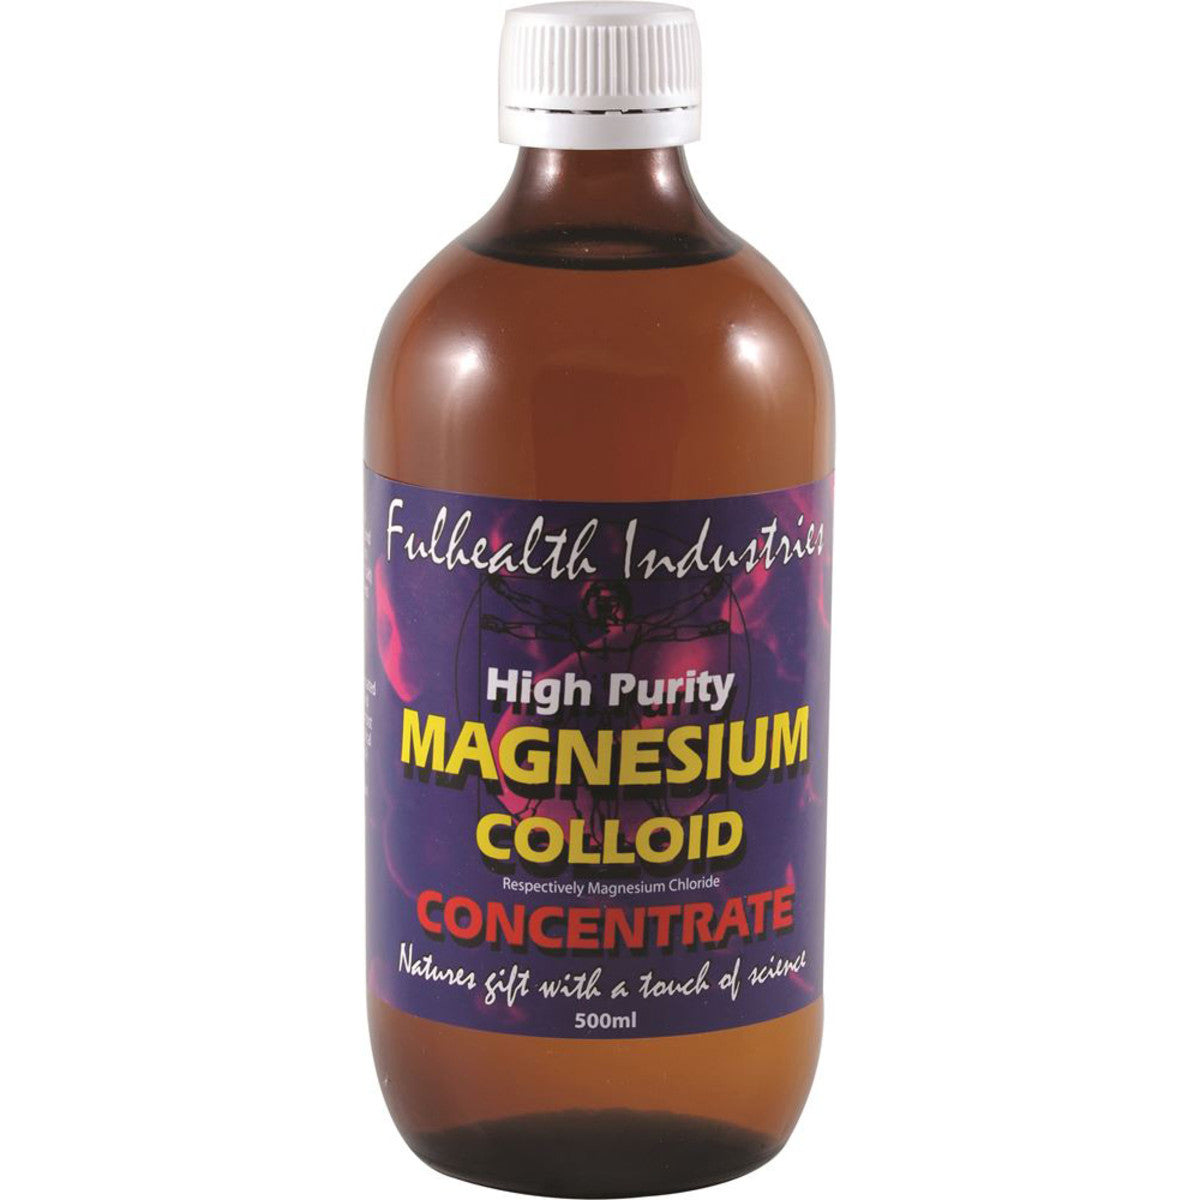 Fulhealth Industries - High Purity Magnesium Colloid Concentrate